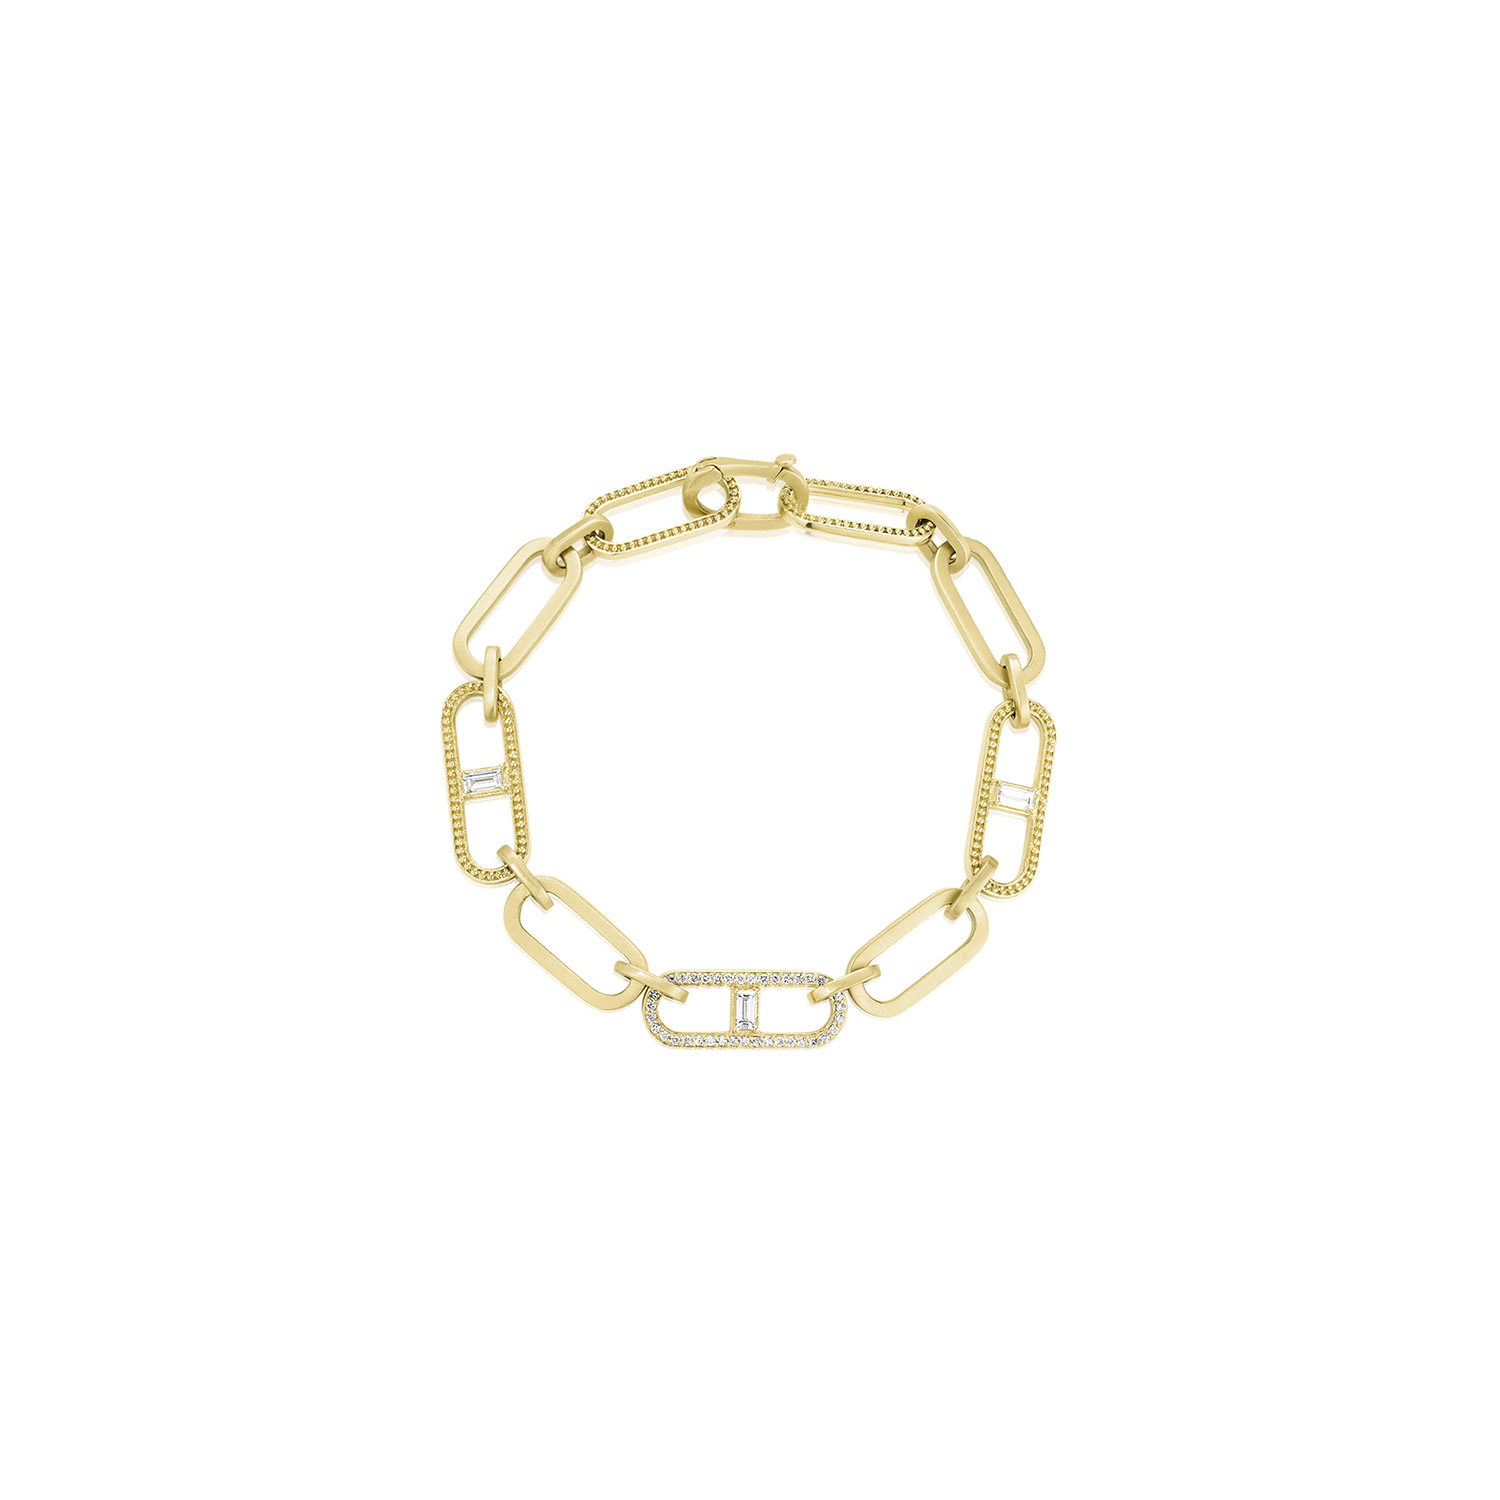 Penny Preville 18k yellow gold textured flat link bracelet with baguette  and round diamonds weighing 0.56 carat total weight, 7.5"